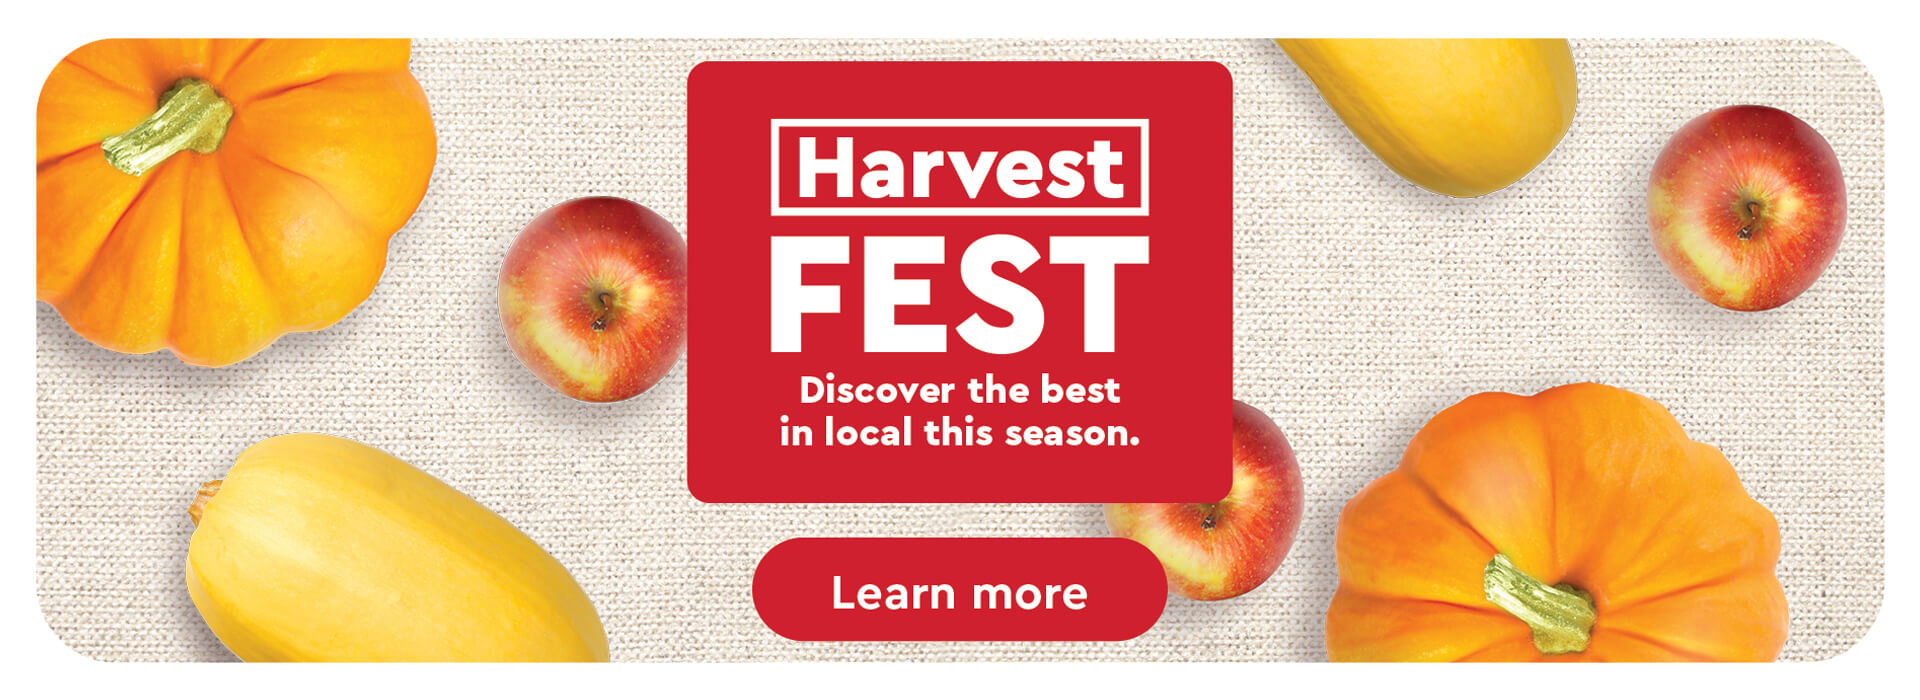 Harvest Fest, Discover the best in local this season.